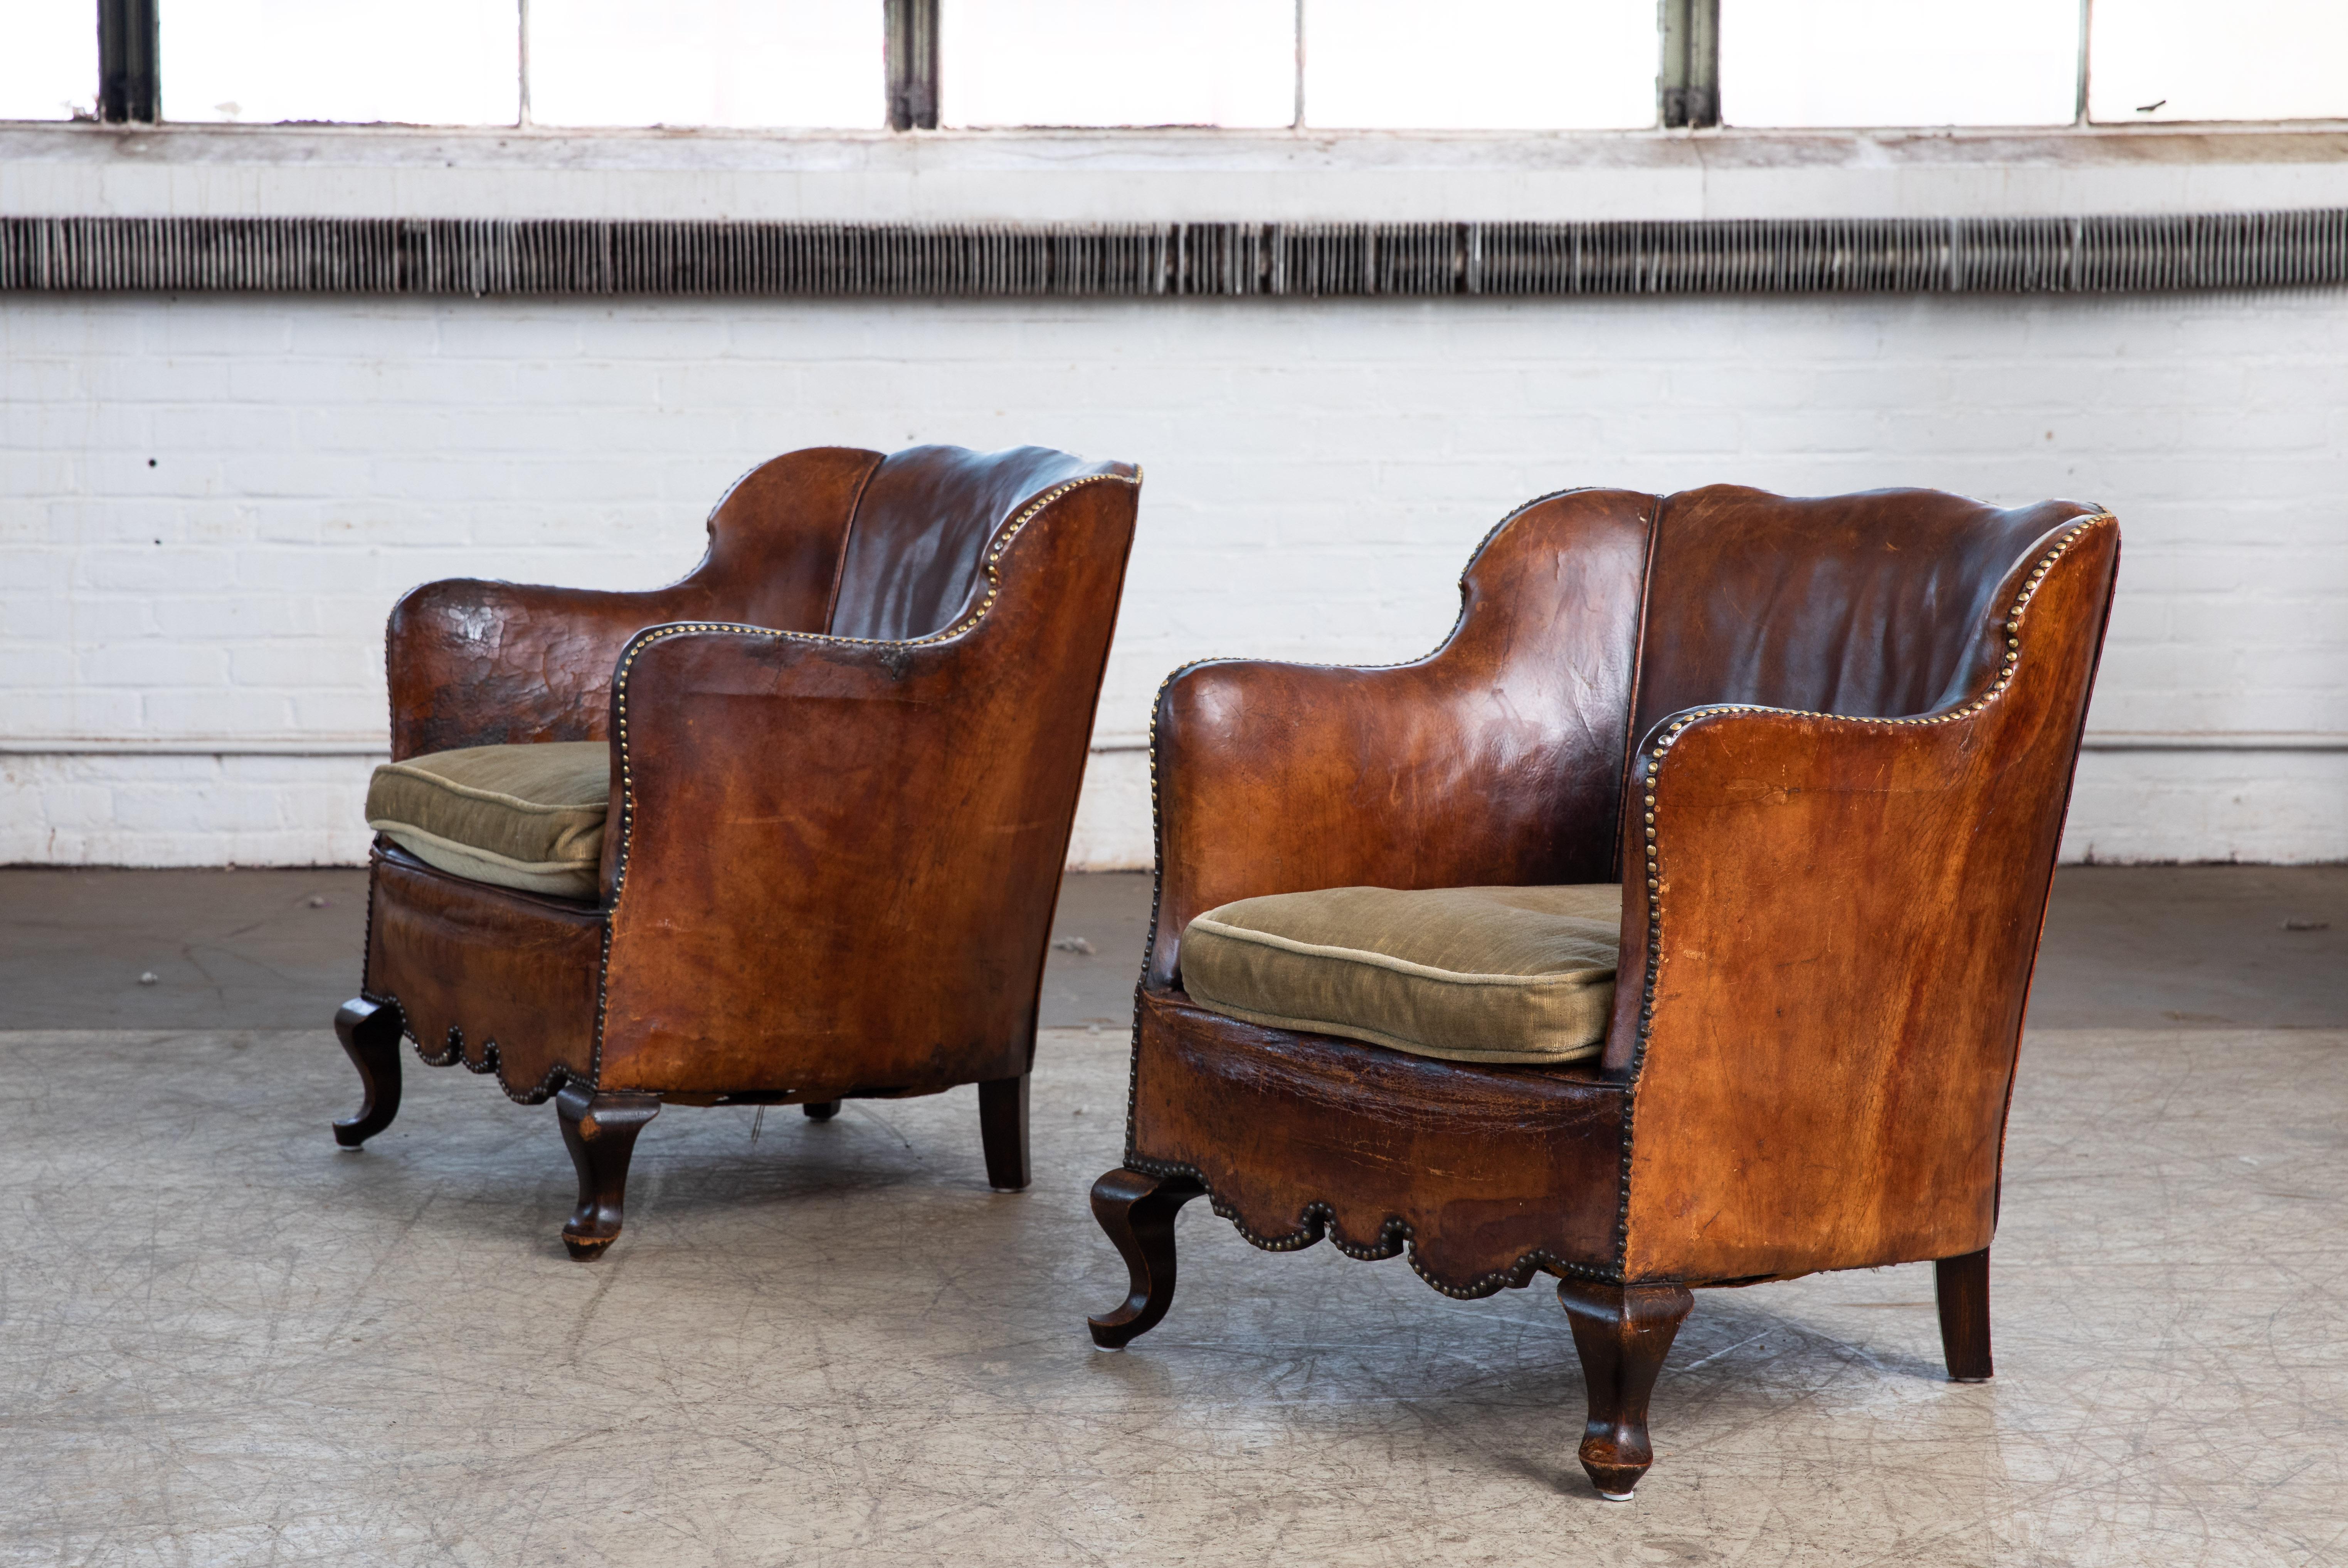 Mid-Century Modern Pair of Classic Danish Club or Library Chairs in Cognac Color Patinated Leather